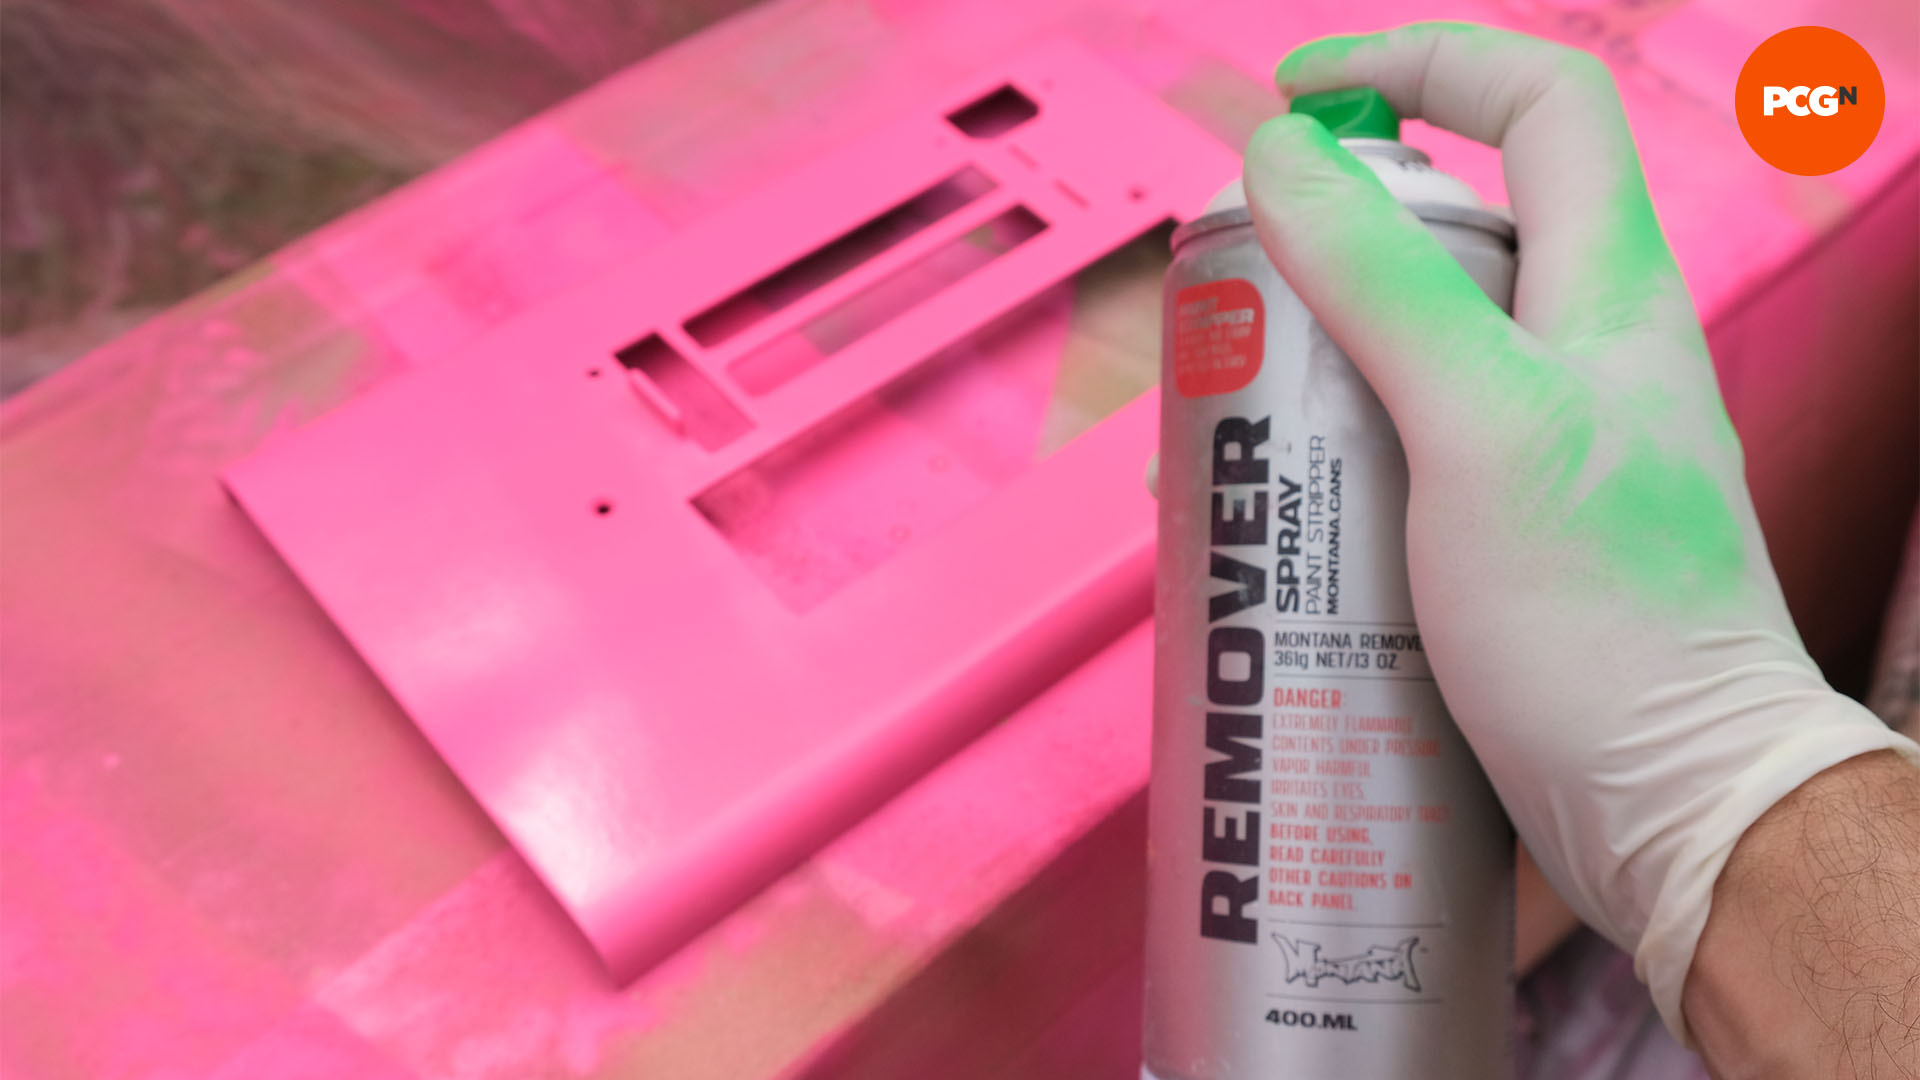 How to paint your PC case: Use paint remover